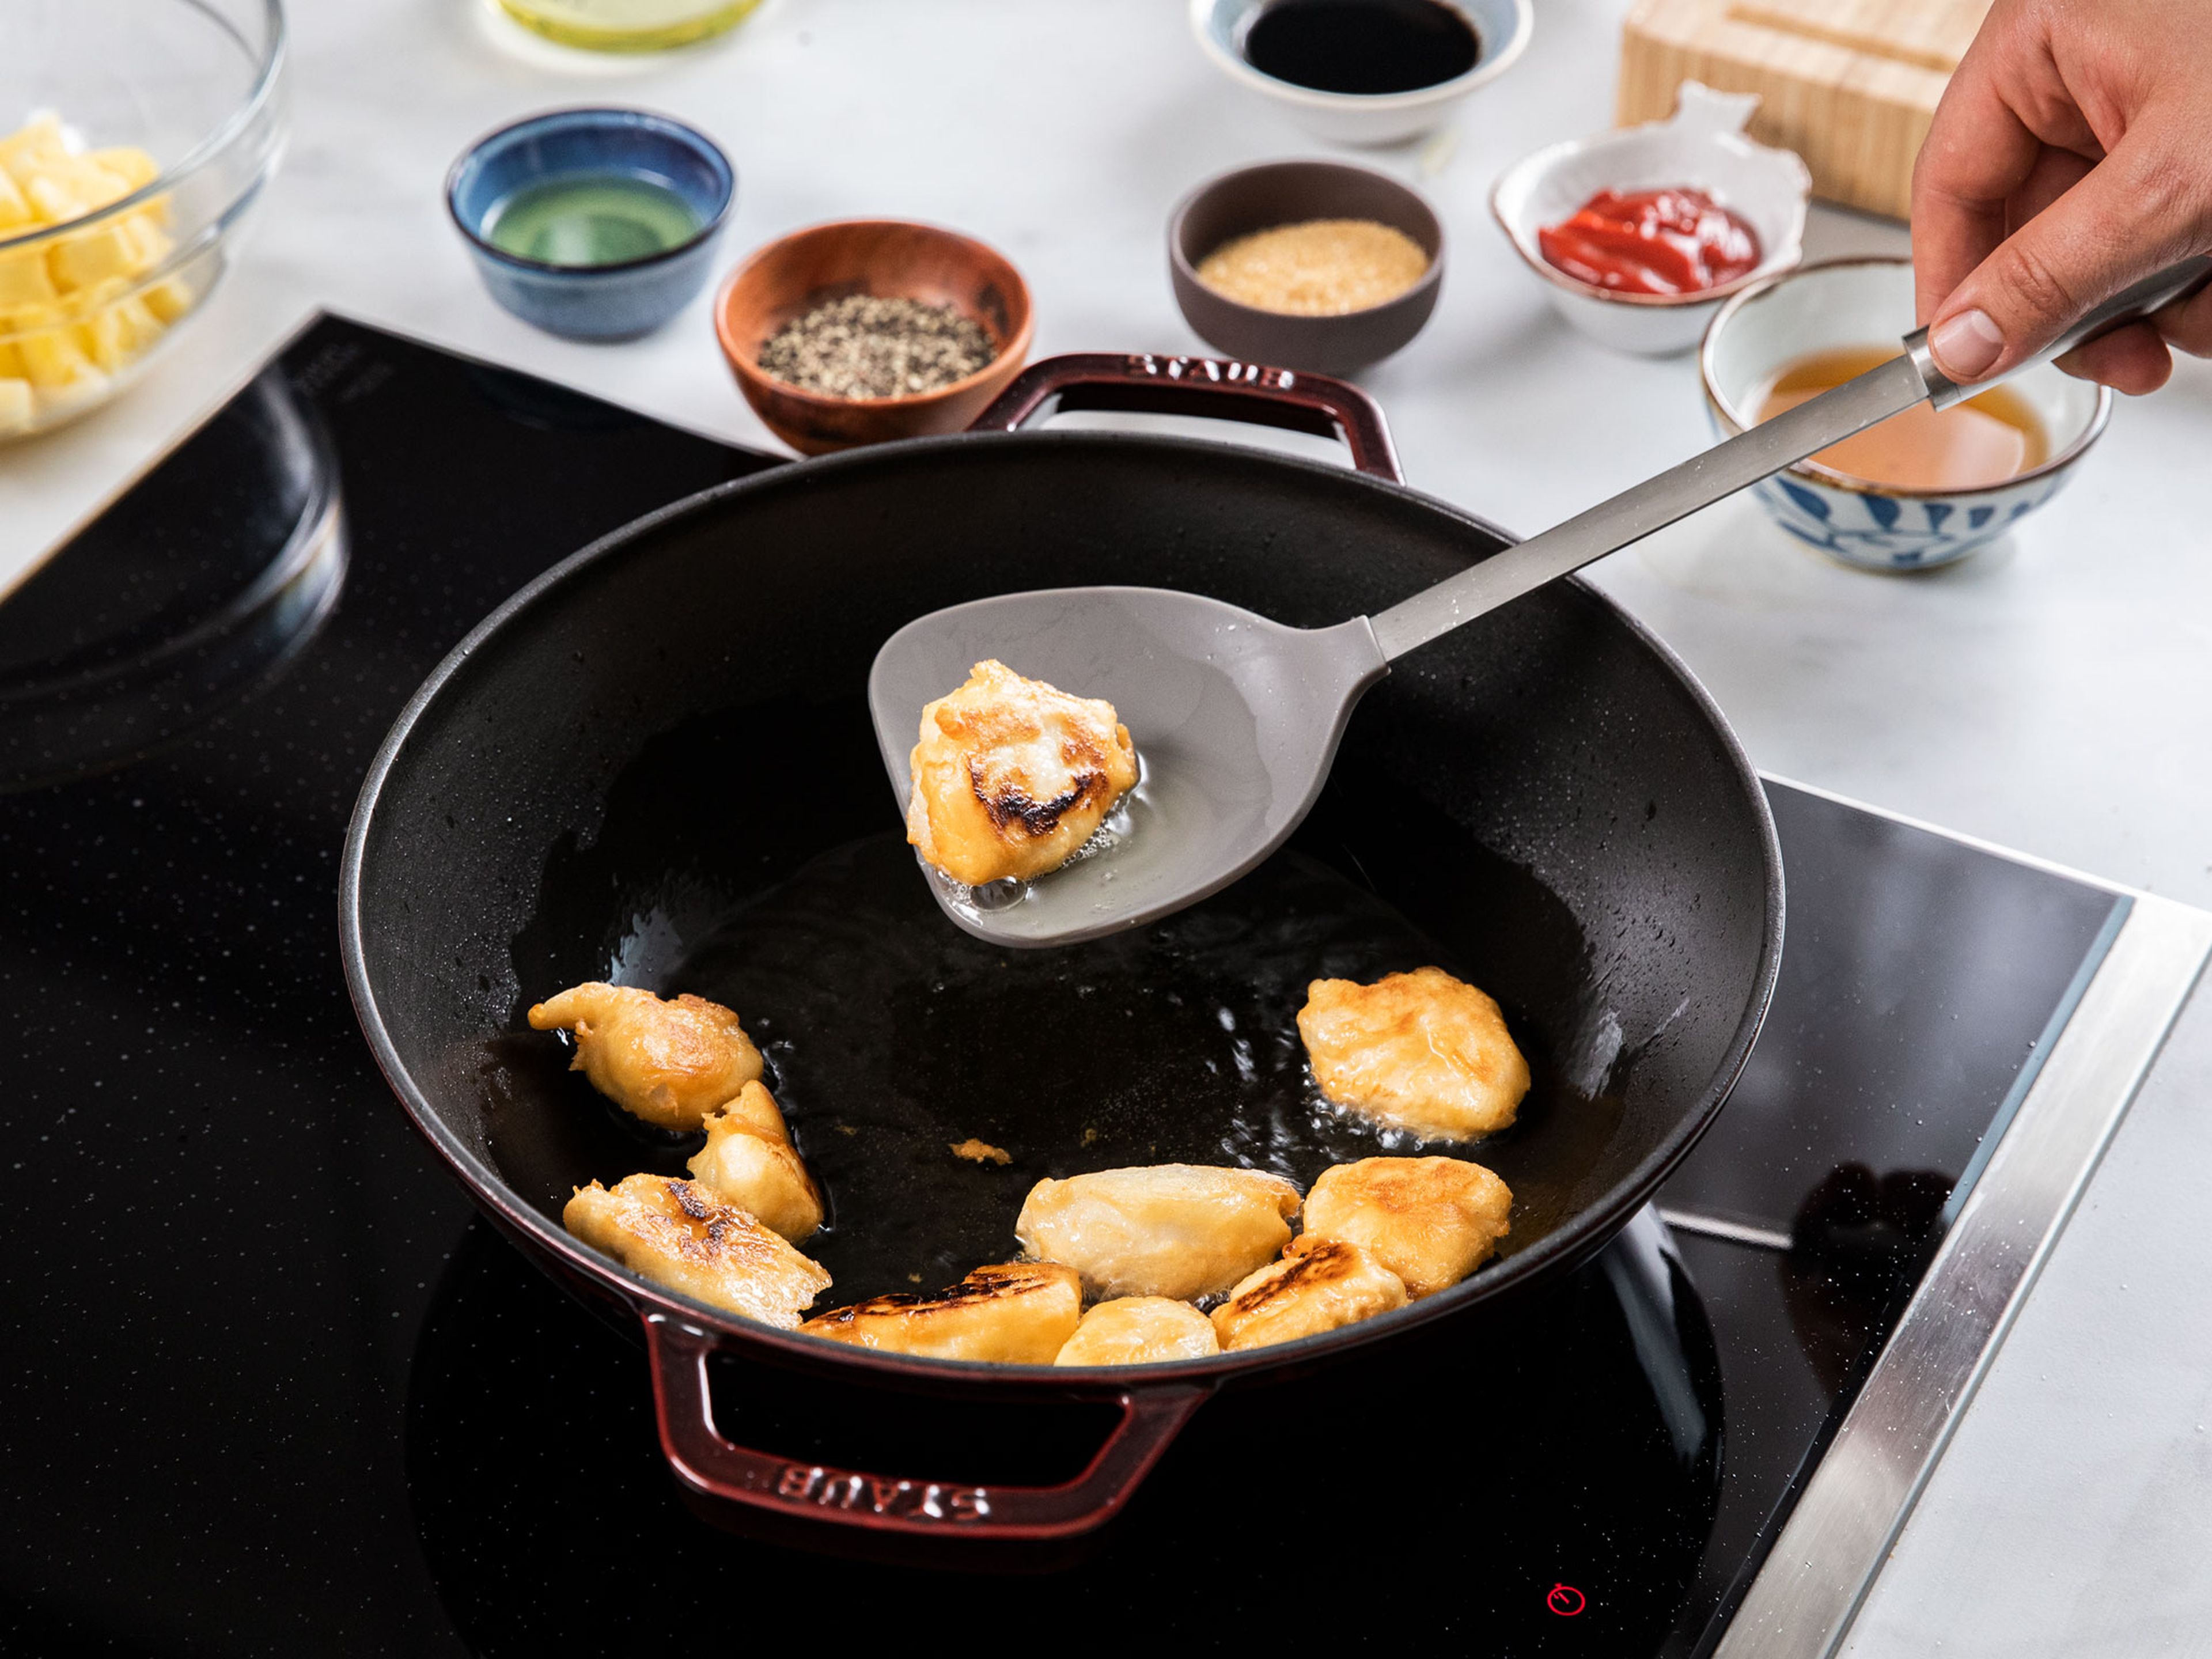 To make the tempura batter, add flour, baking powder, starch, salt, a quarter of the sunflower oil, and water to a bowl. Whisk to combine. Add chicken and toss to coat. Heat remaining sunflower oil in a wok over 170°C/340°F, add chicken, and deep fry in batches until golden brown on both sides. Transfer fried chicken to a paper towel-lined plate to drain.